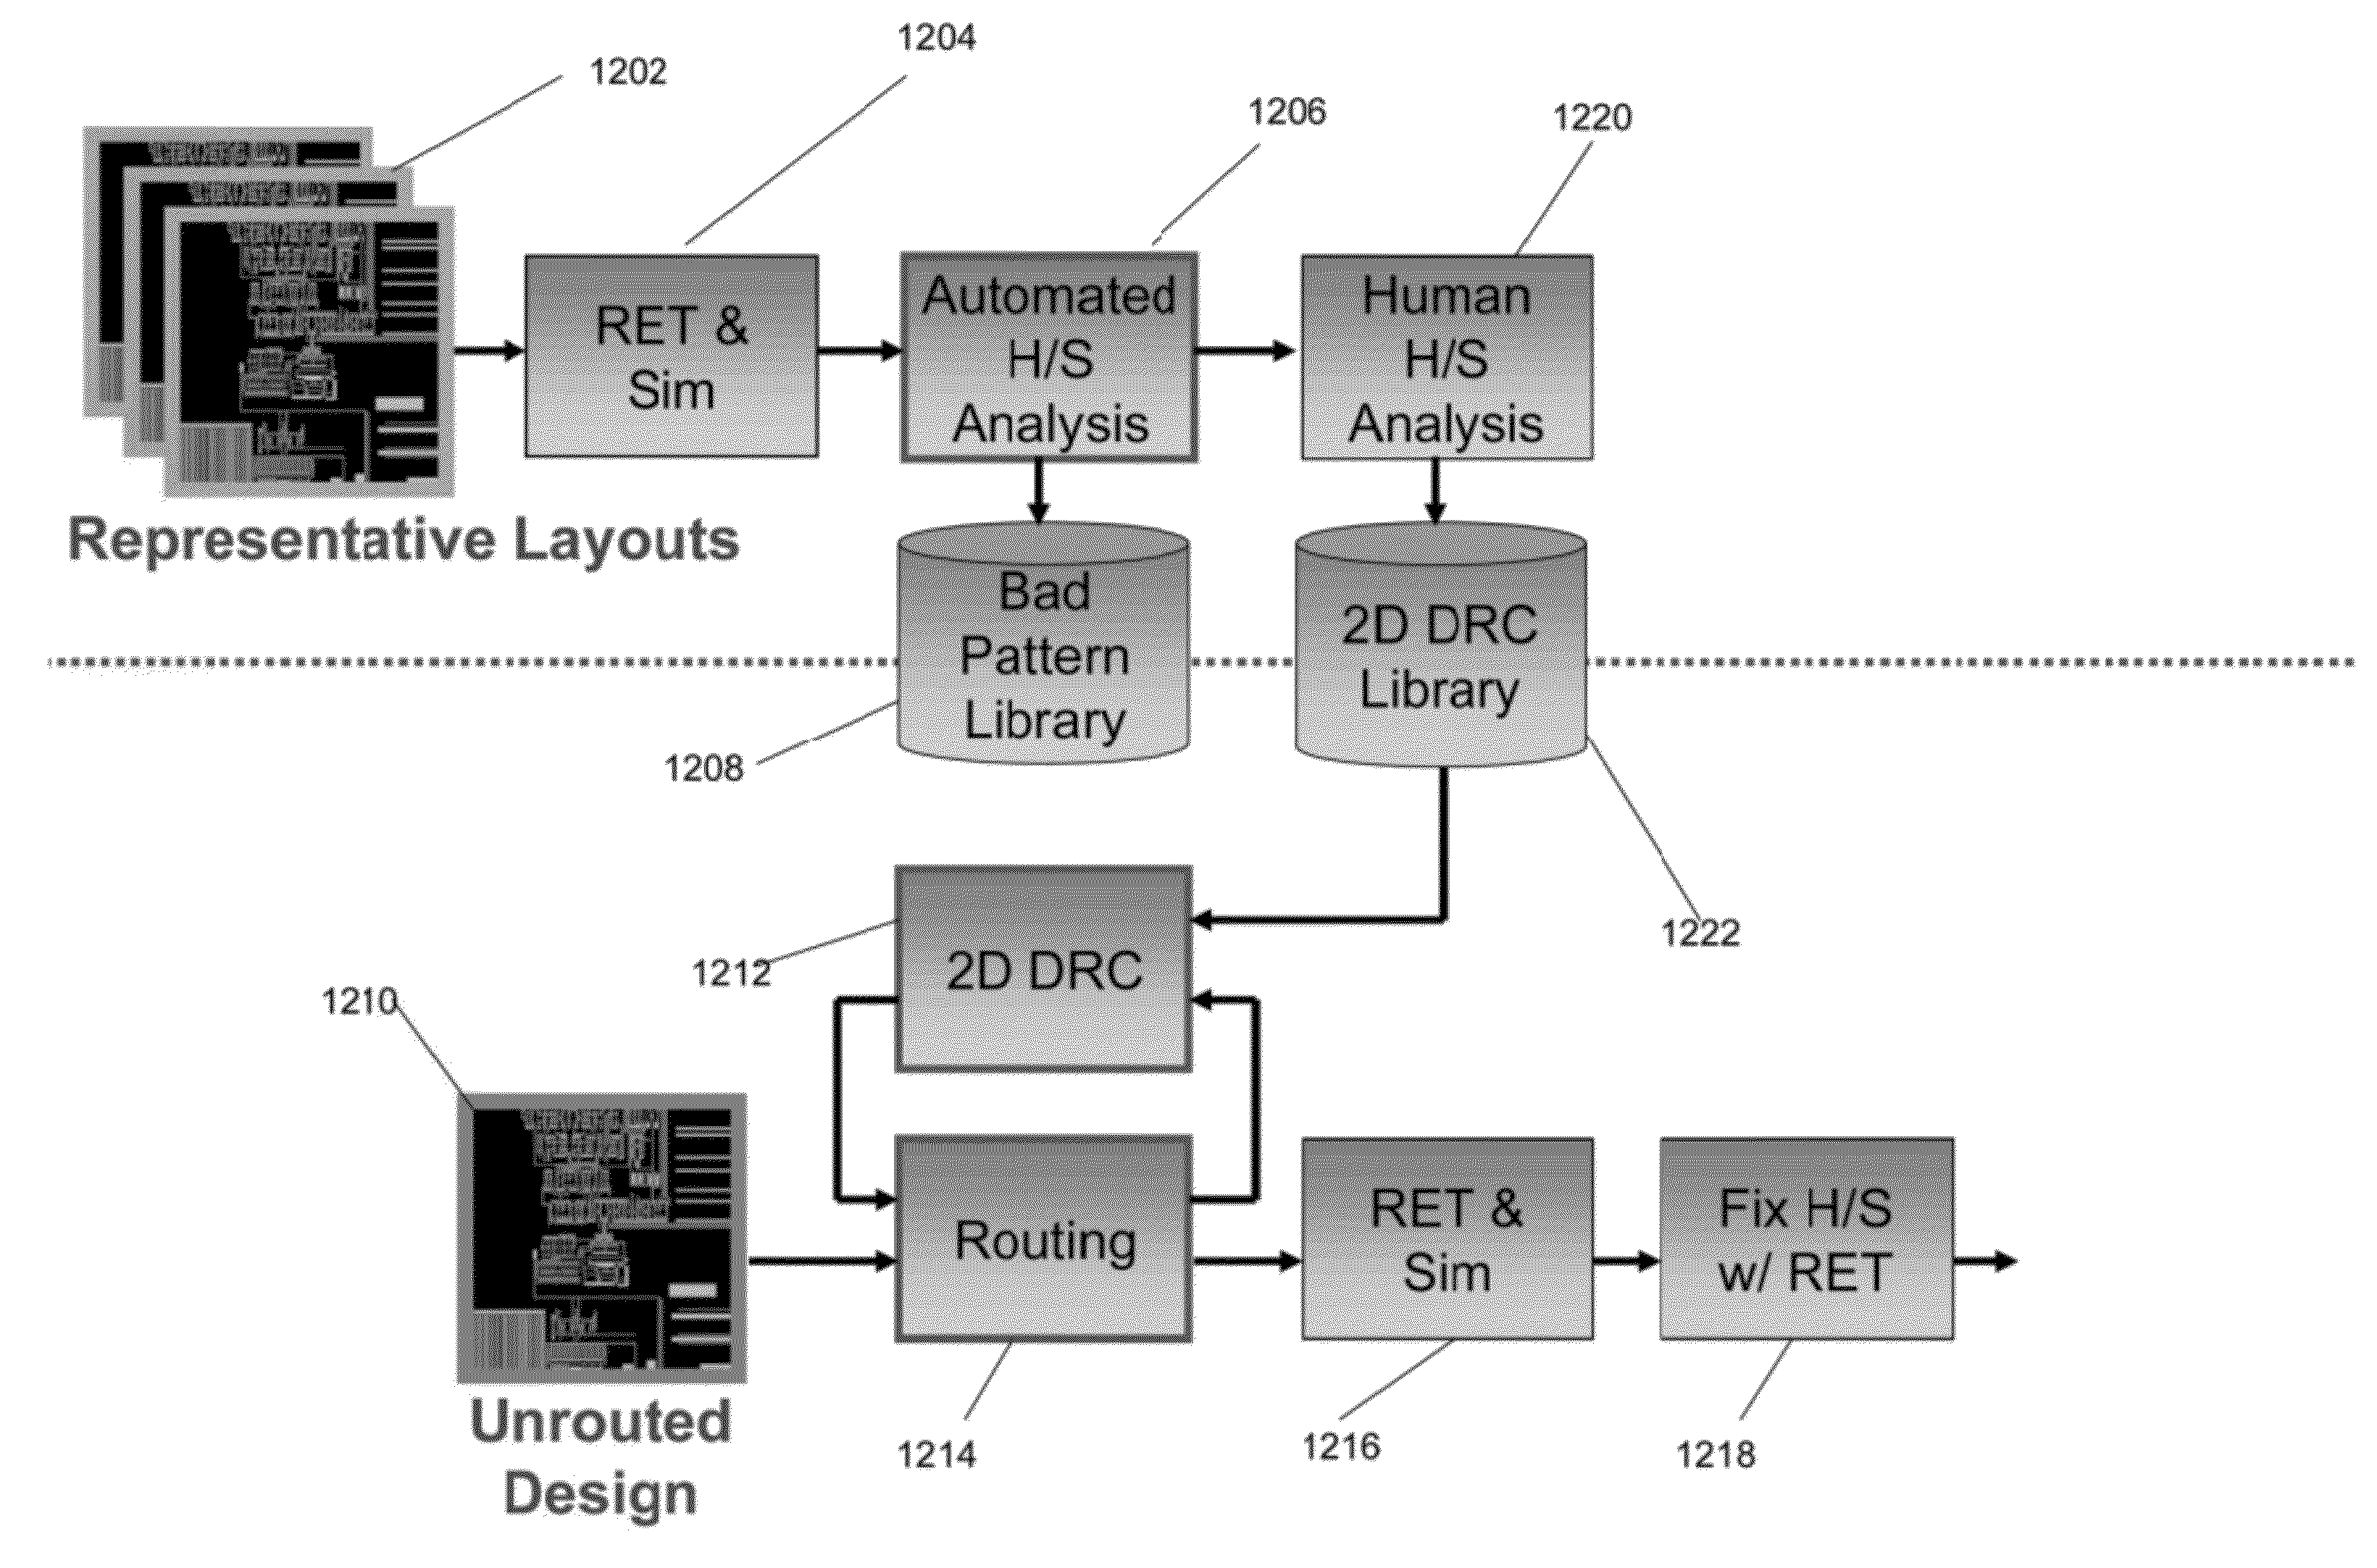 Method and system for model-based design and layout of an integrated circuit